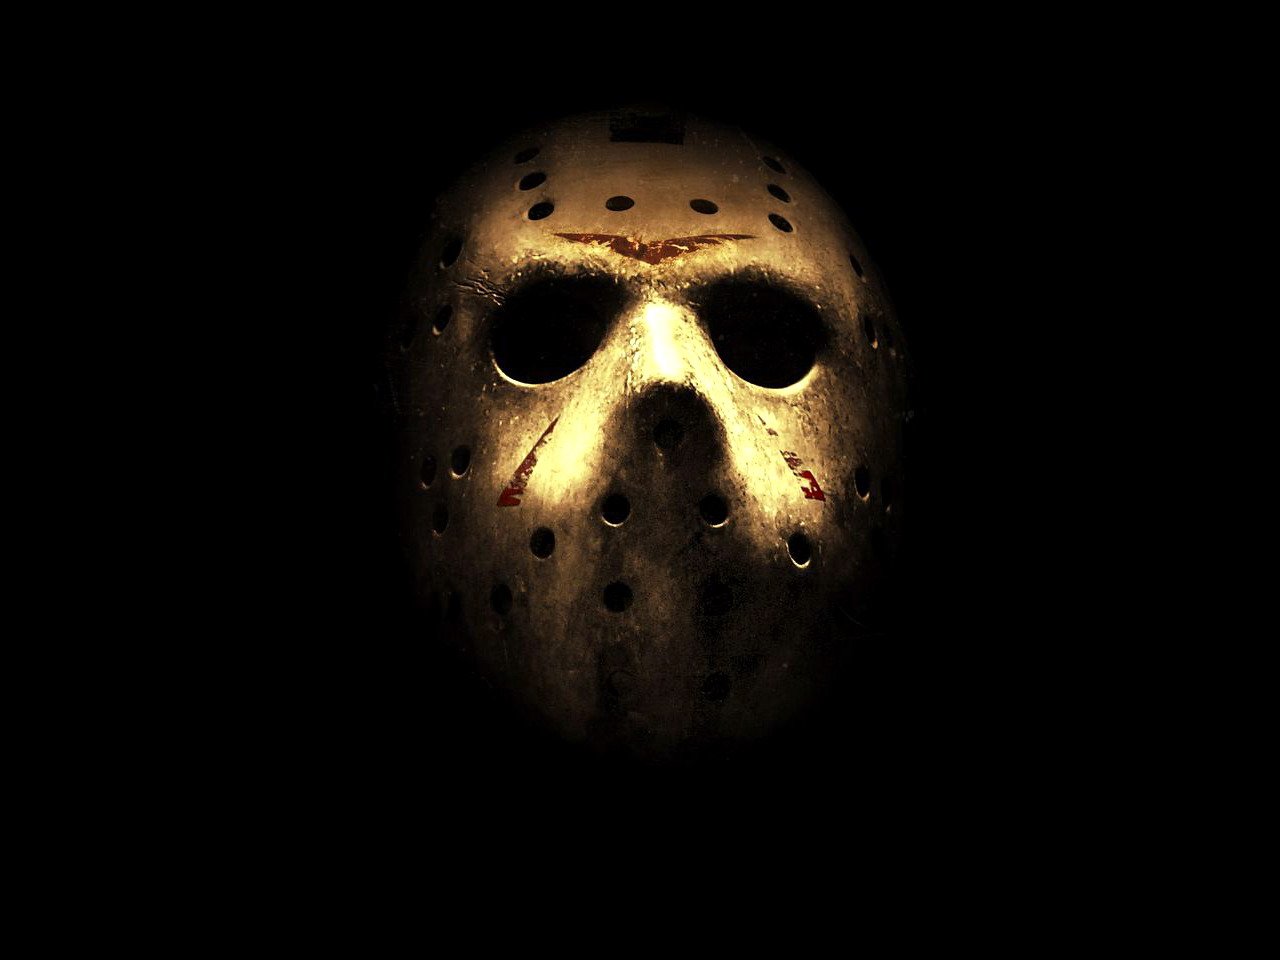 Friday The 13th Wallpaper Moallpapers Org